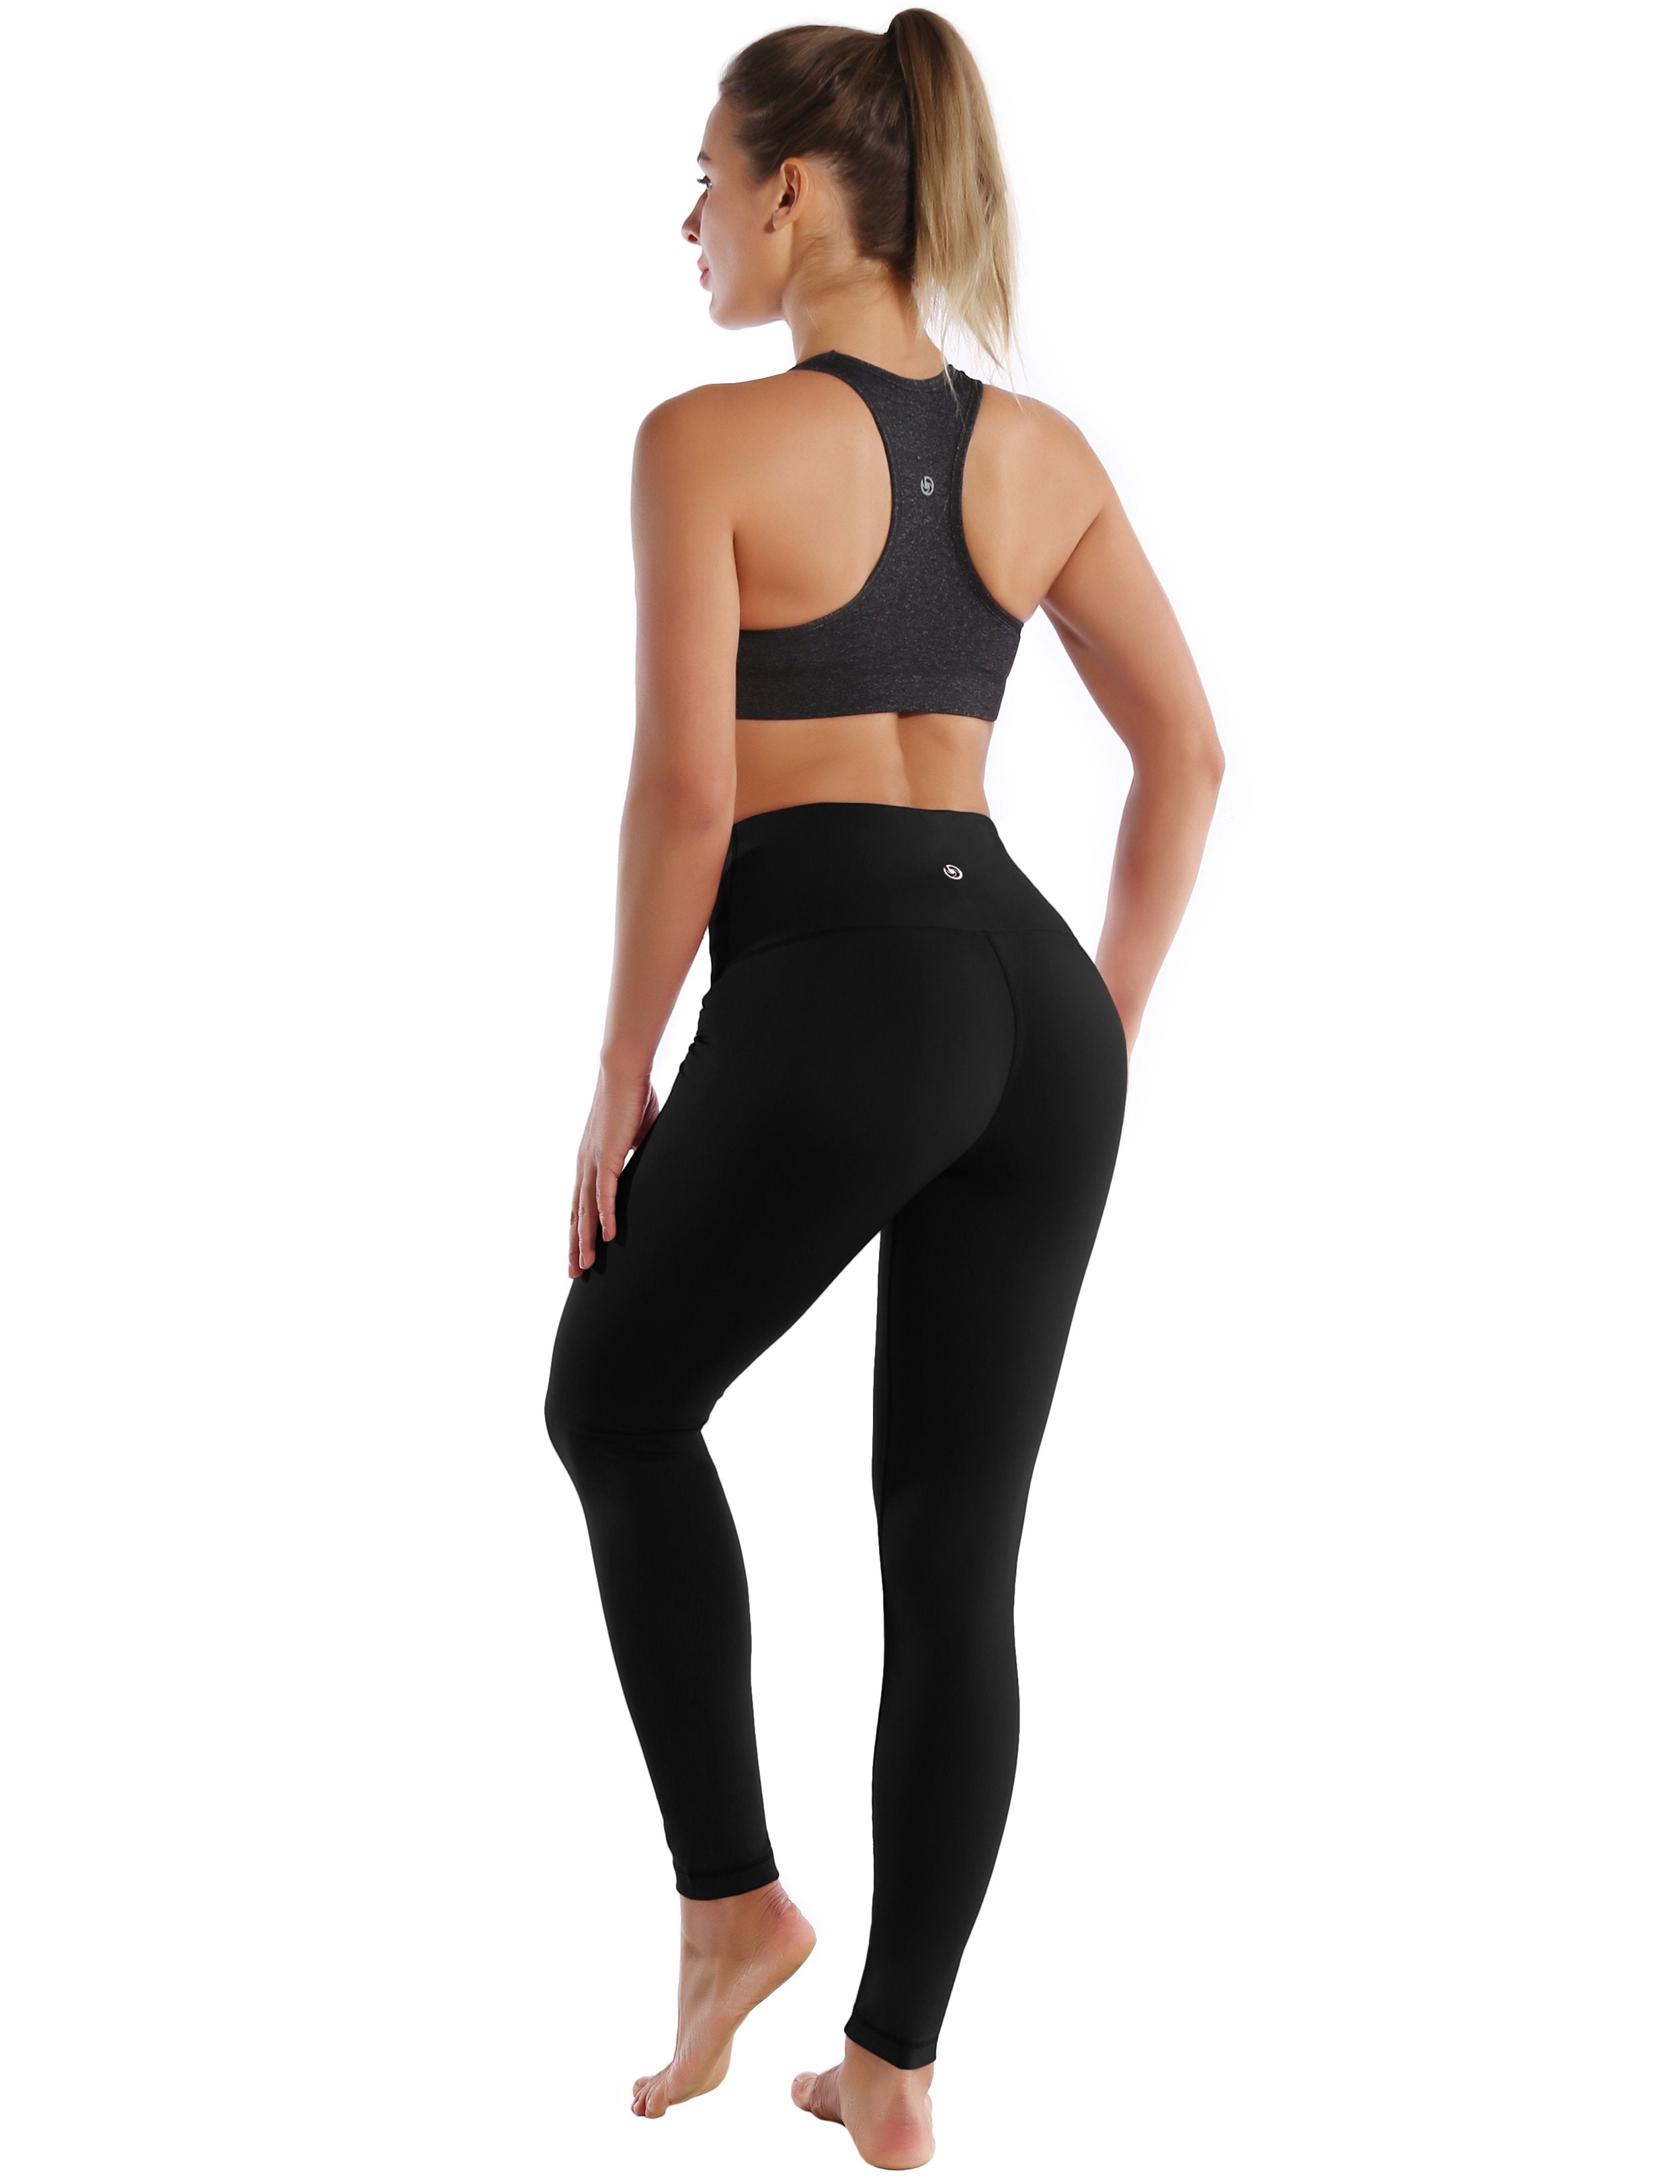 High Waist Yoga Pants black 75%Nylon/25%Spandex Fabric doesn't attract lint easily 4-way stretch No see-through Moisture-wicking Tummy control Inner pocket Four lengths